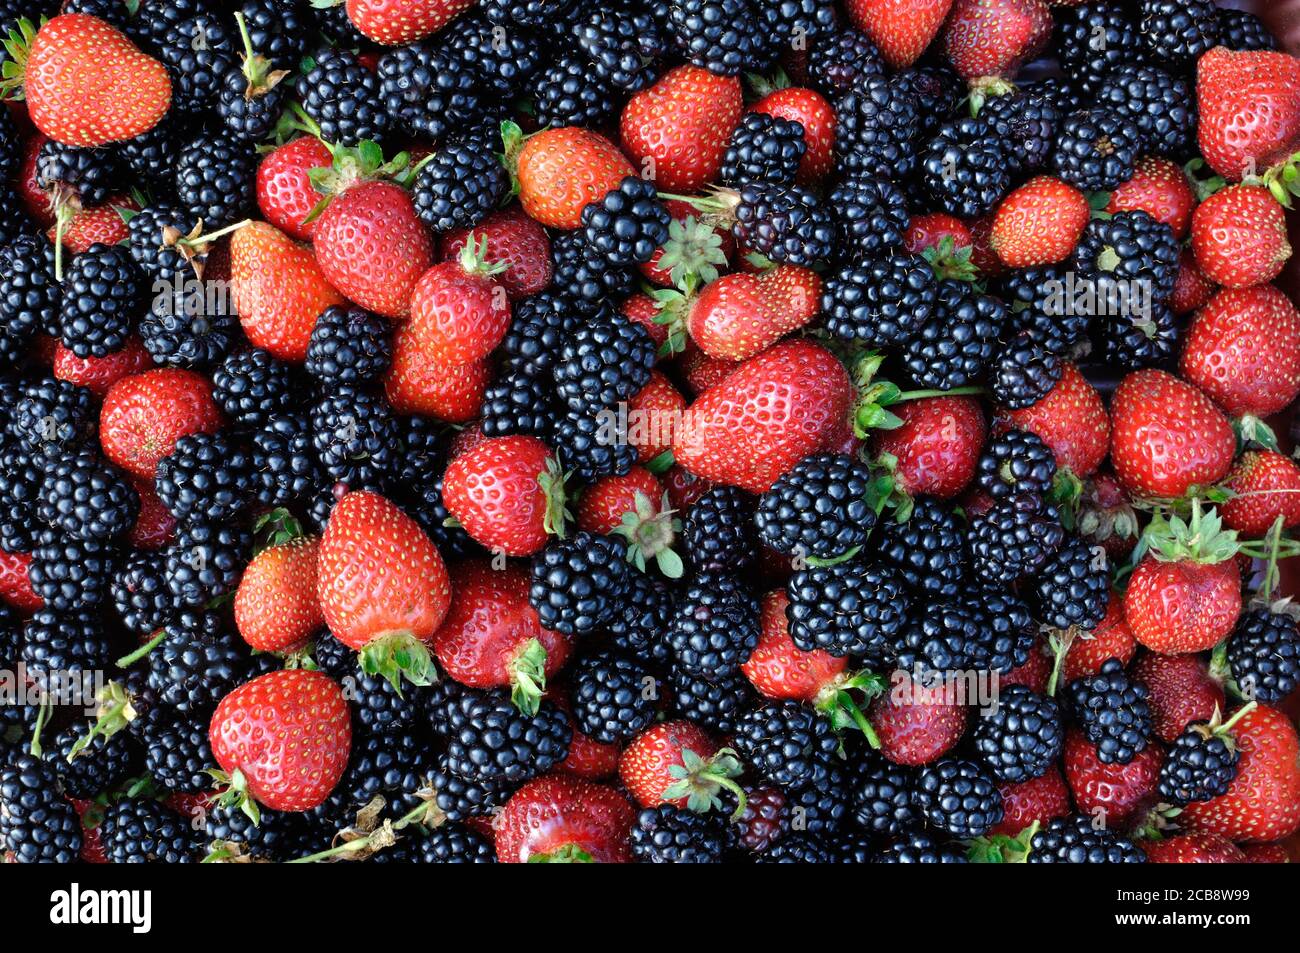 close-up of fresh ripe strawberries and  blackberries after harvesting in the garden, high angle view Stock Photo